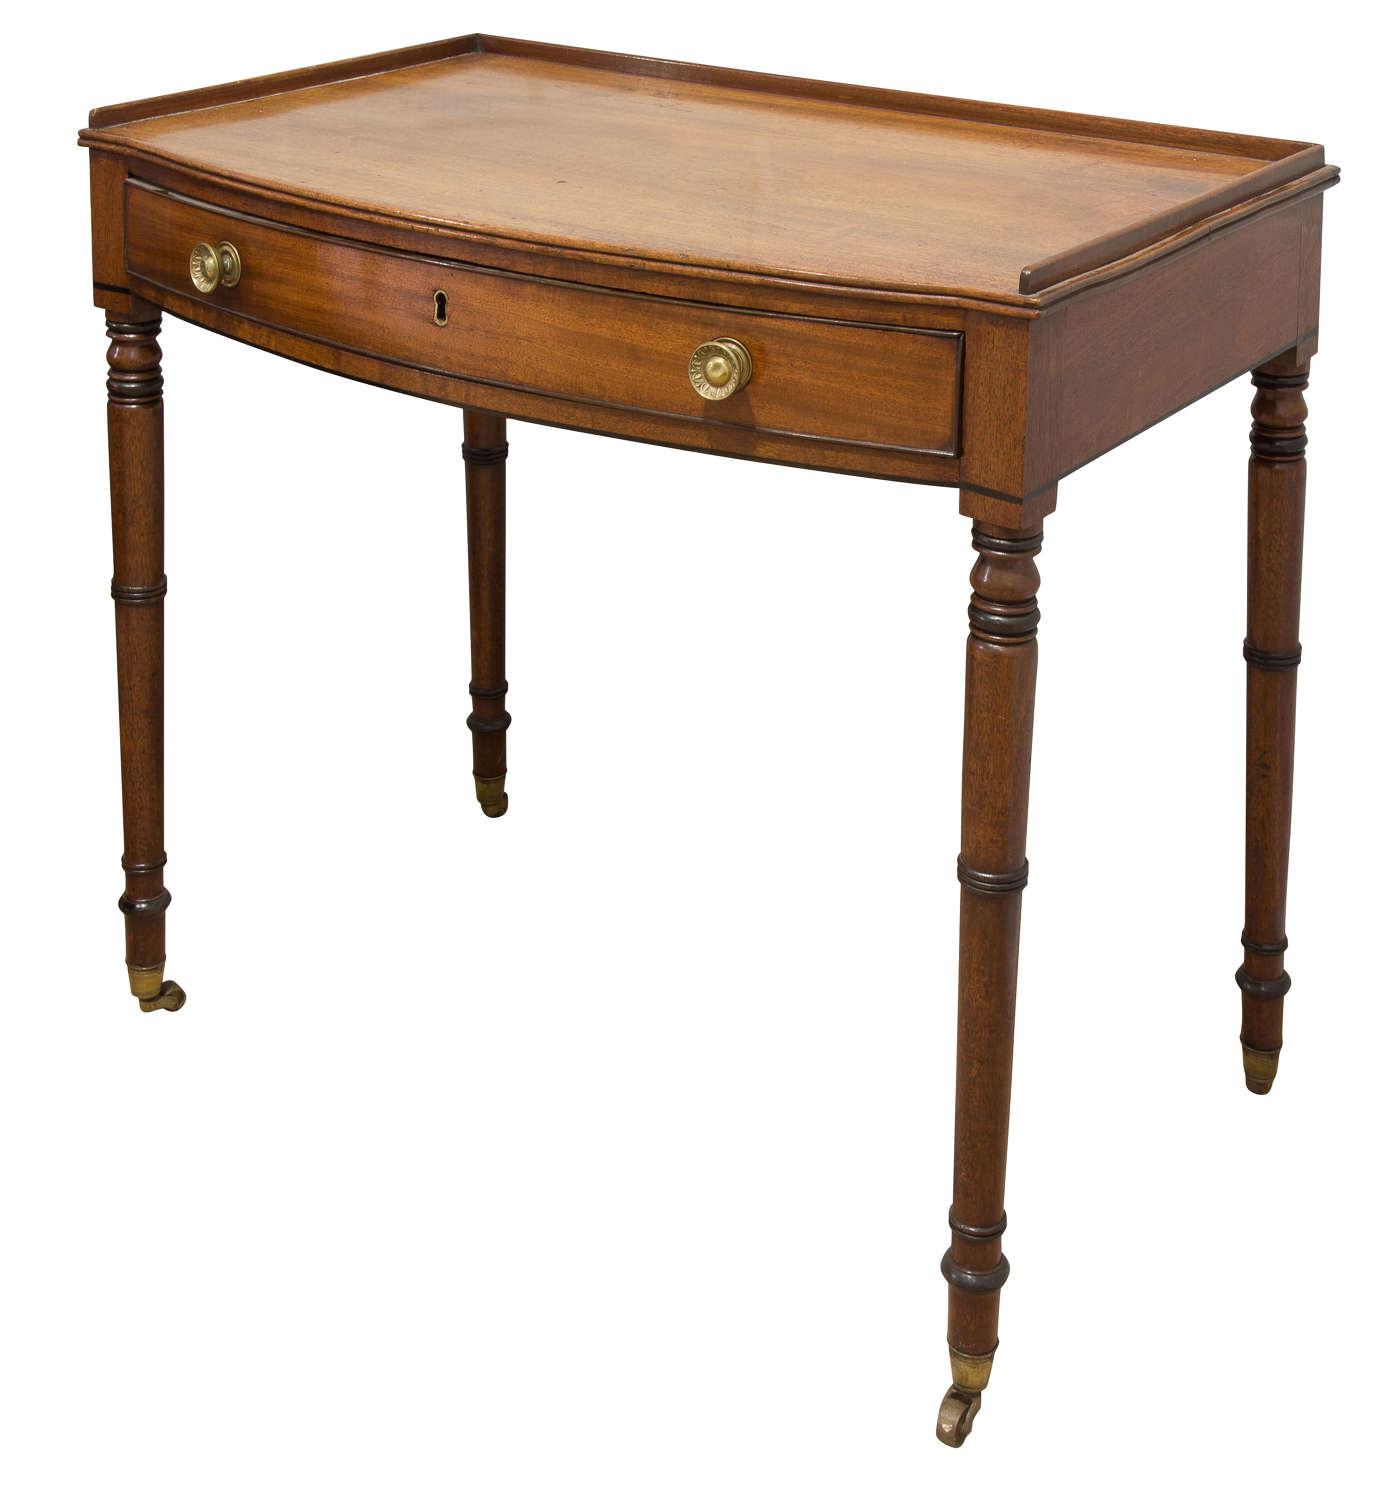 A George III mahogany bow fronted side table